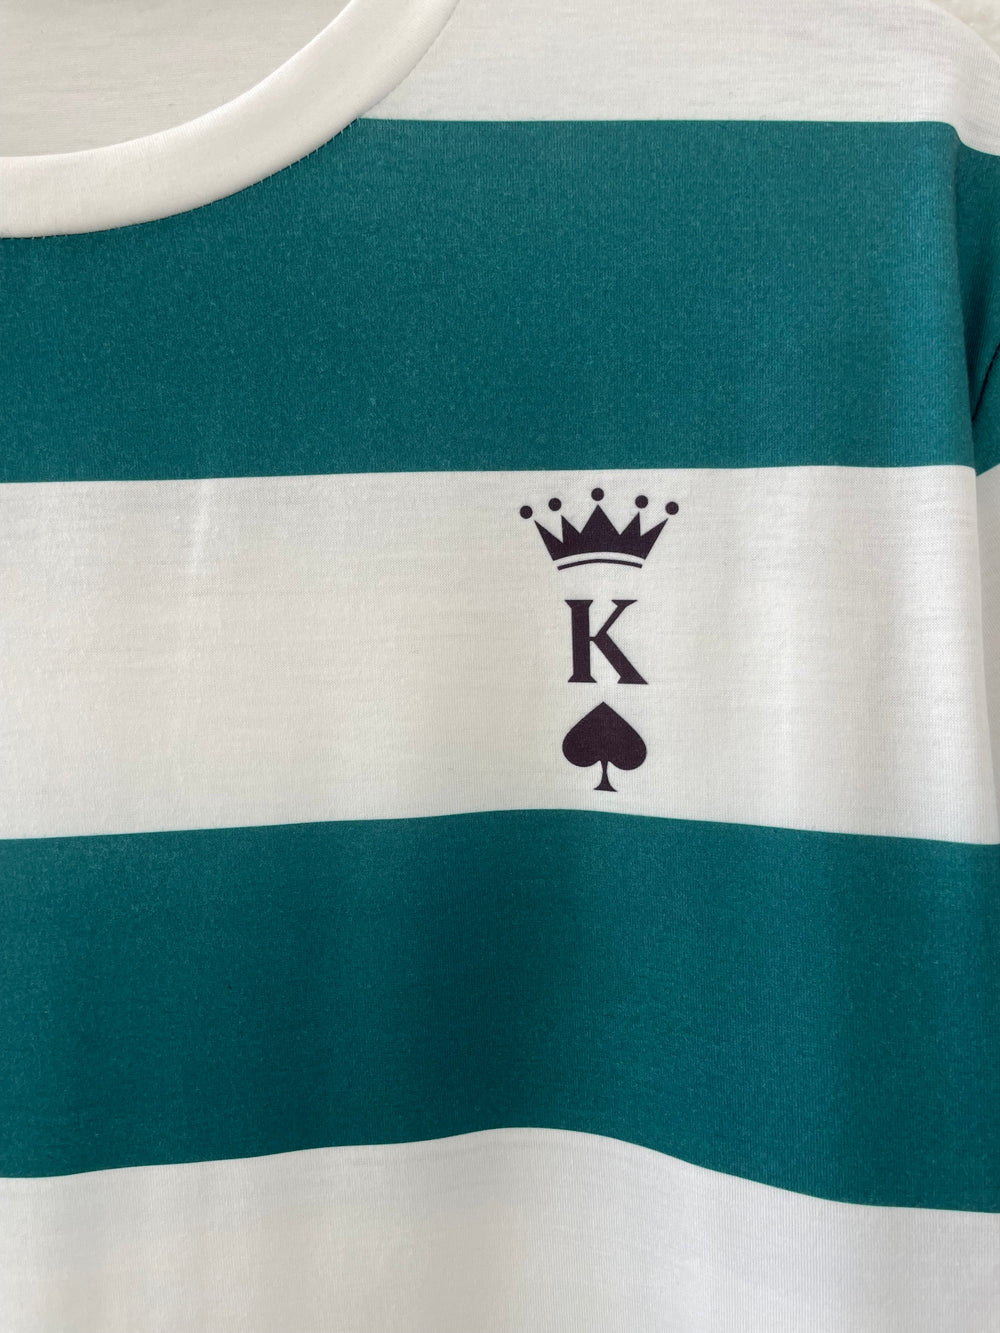 Image of Green/White striped tee